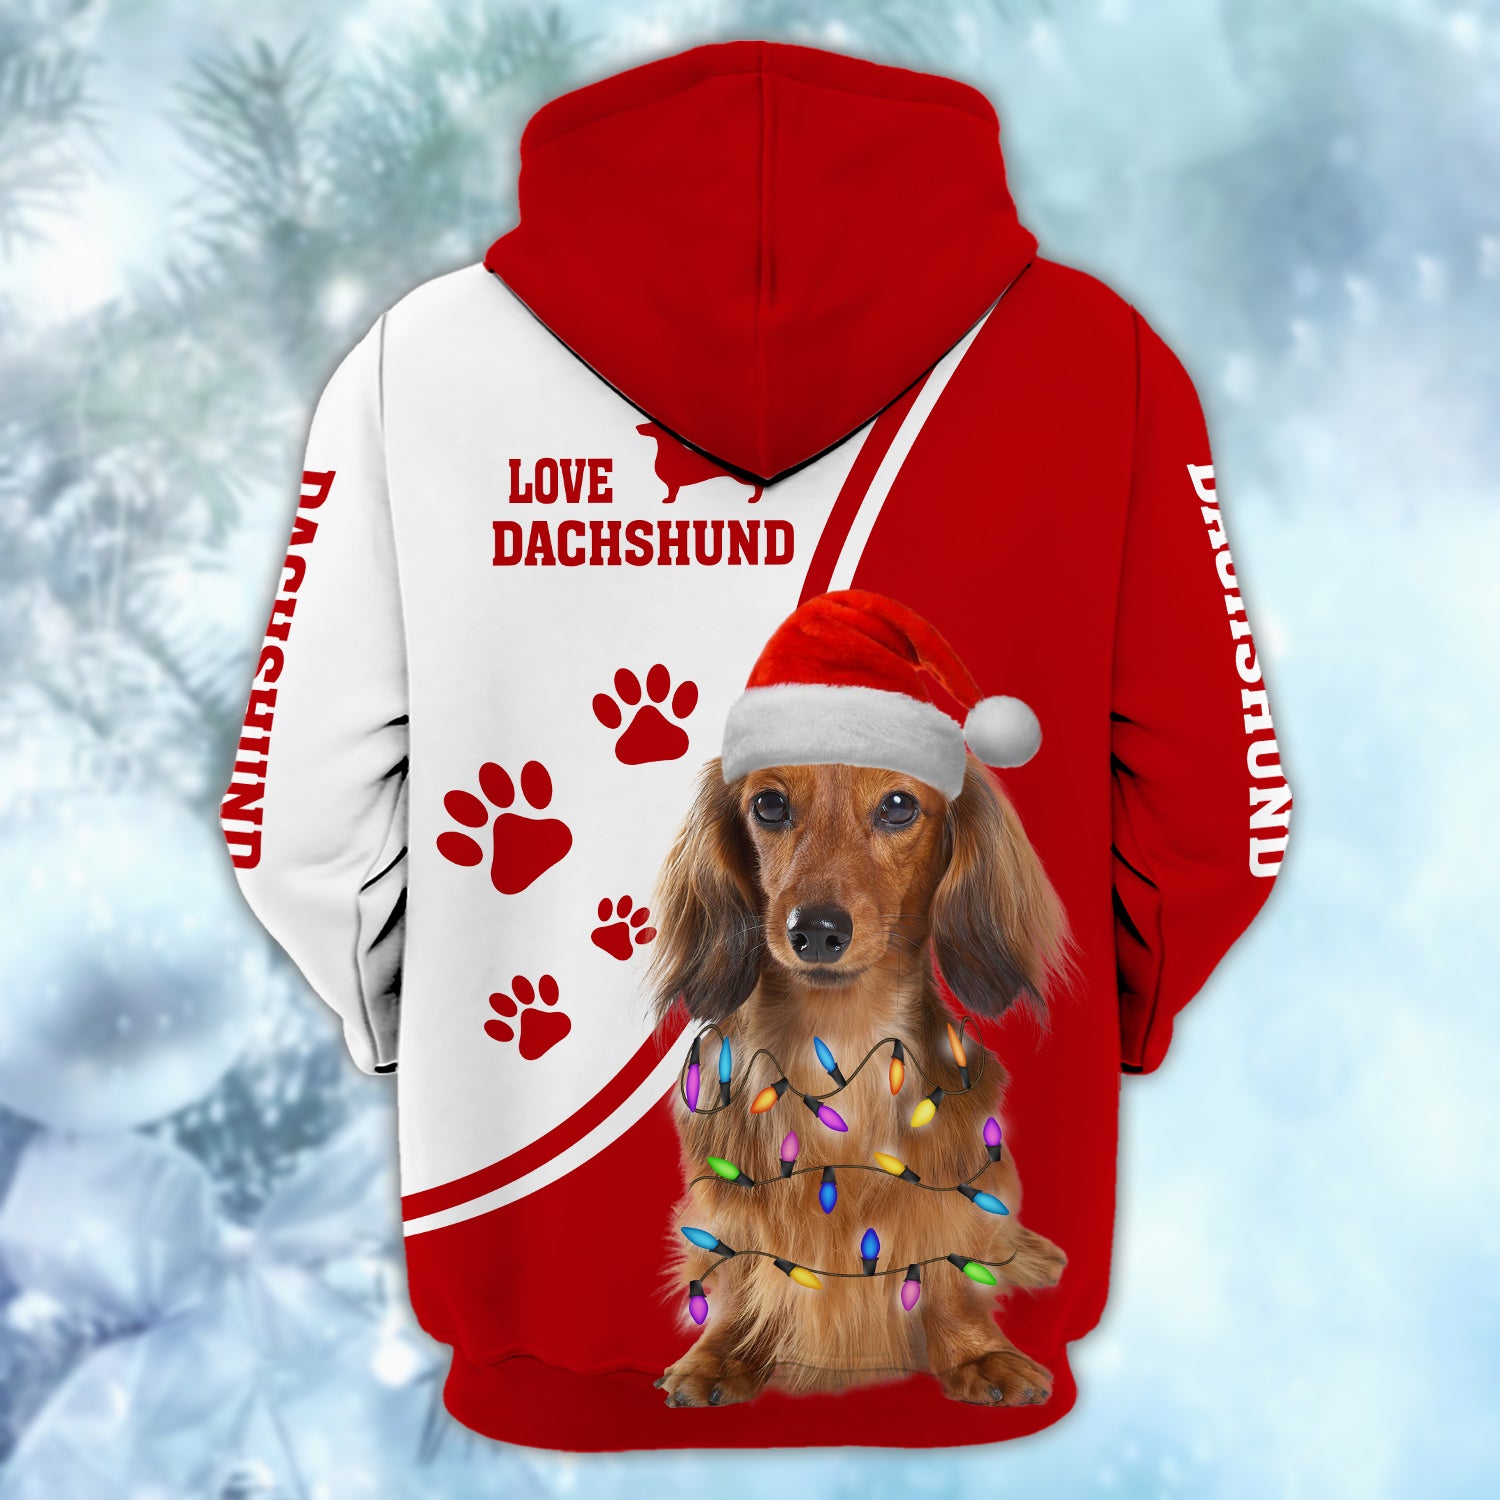 Love Dachshund - Personalized Name 3D Zipper hoodie - TAD 165